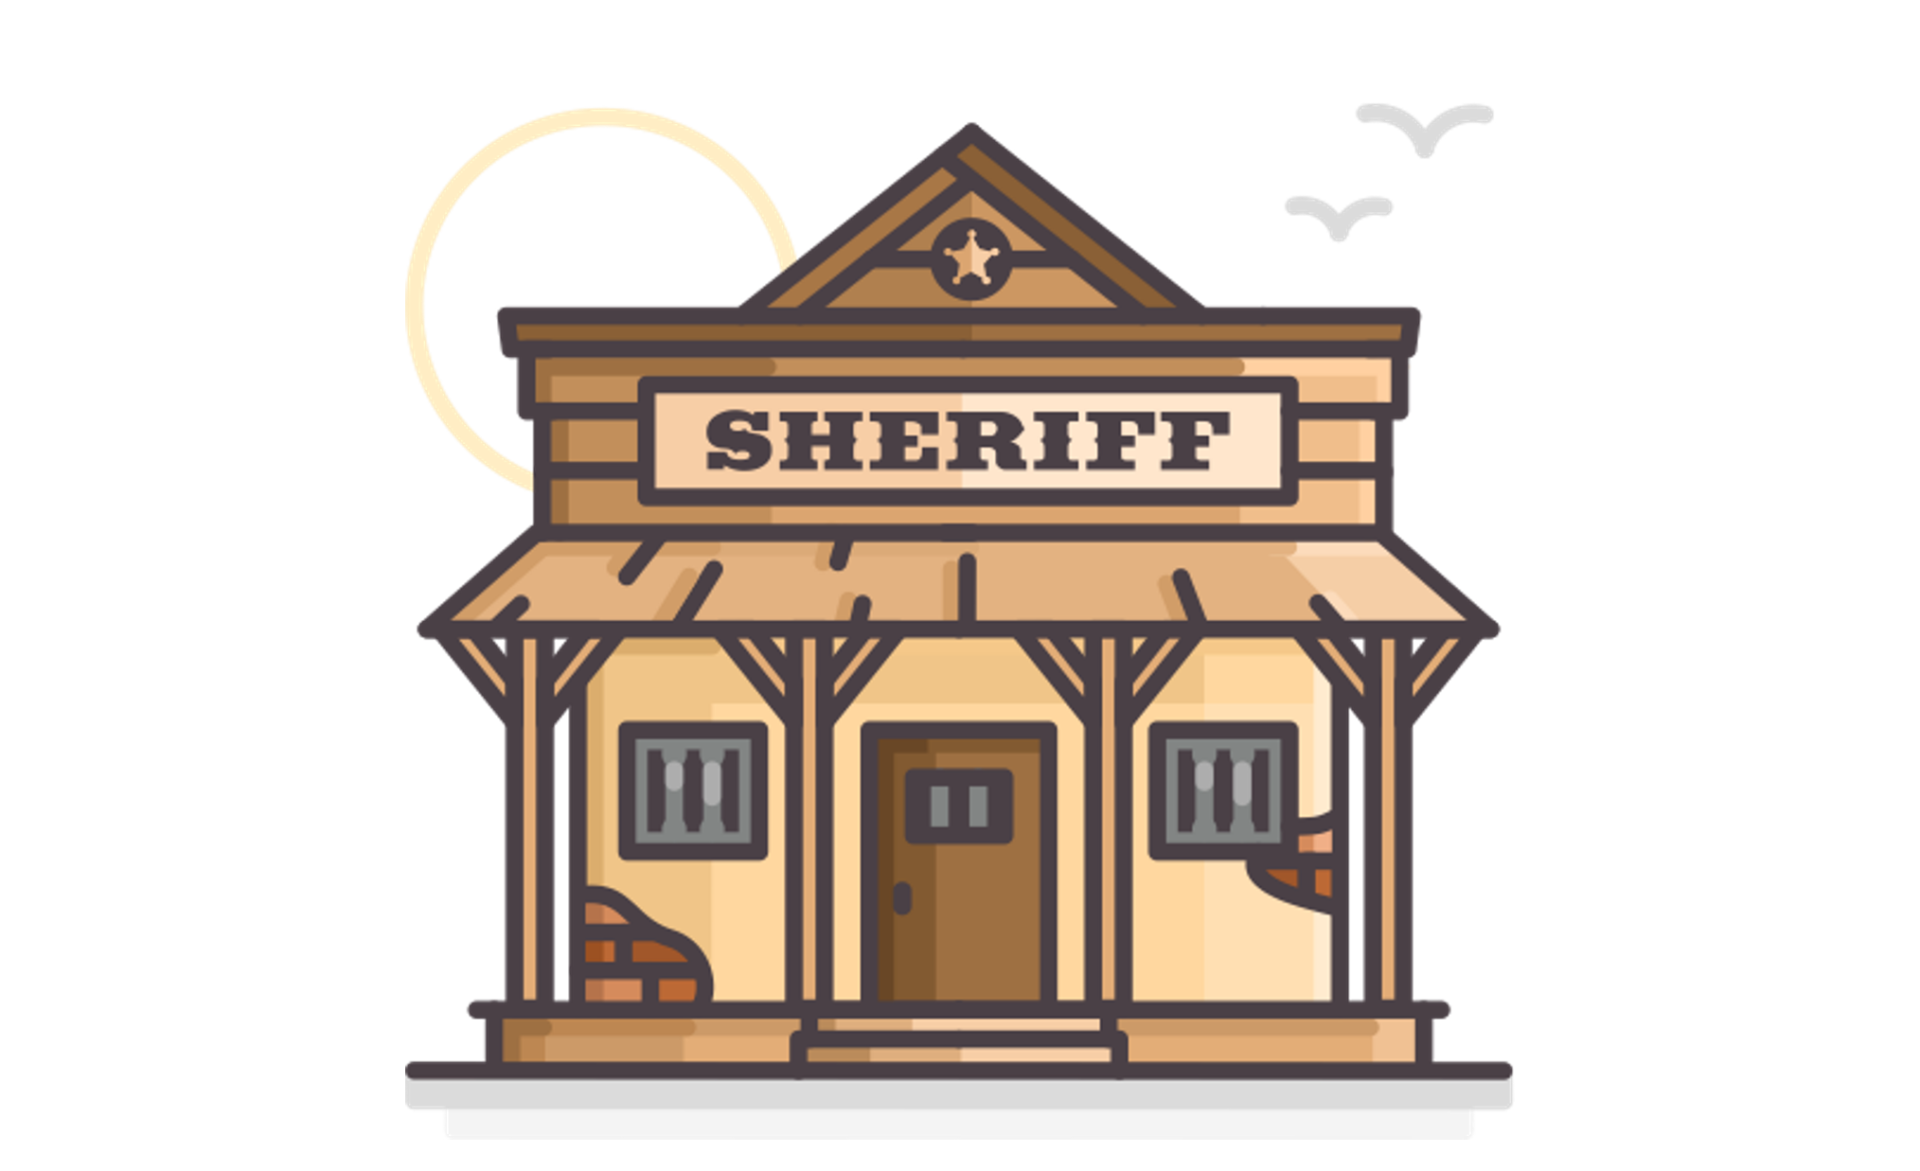 Icon of a sheriff's building from the Wild West era